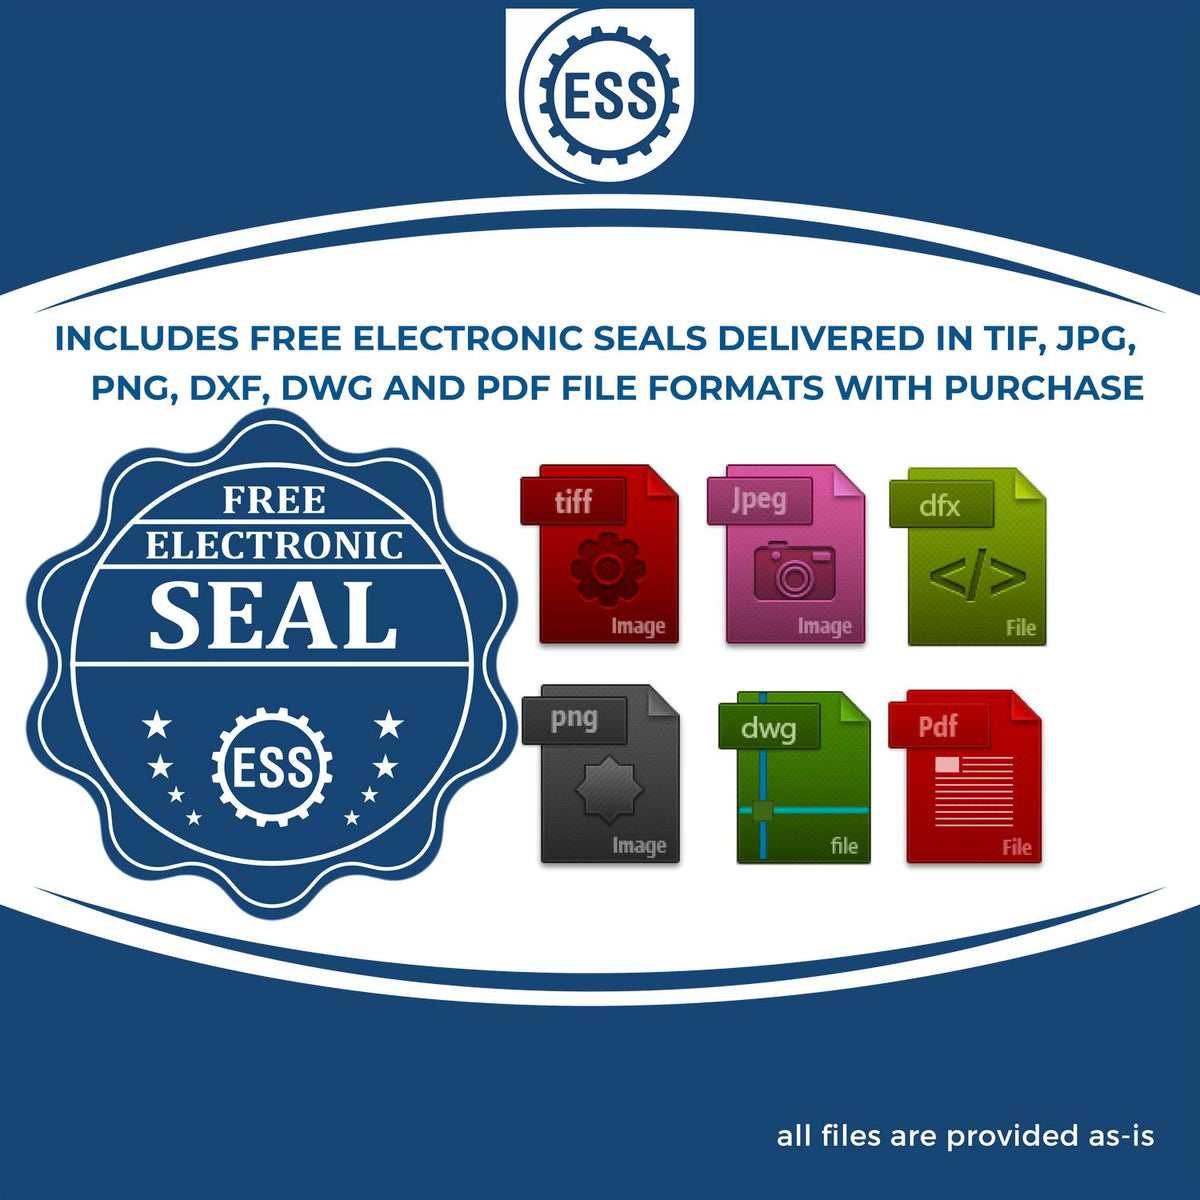 An infographic for the free electronic seal for the Virginia Geologist Desk Seal illustrating the different file type icons such as DXF, DWG, TIF, JPG and PNG.